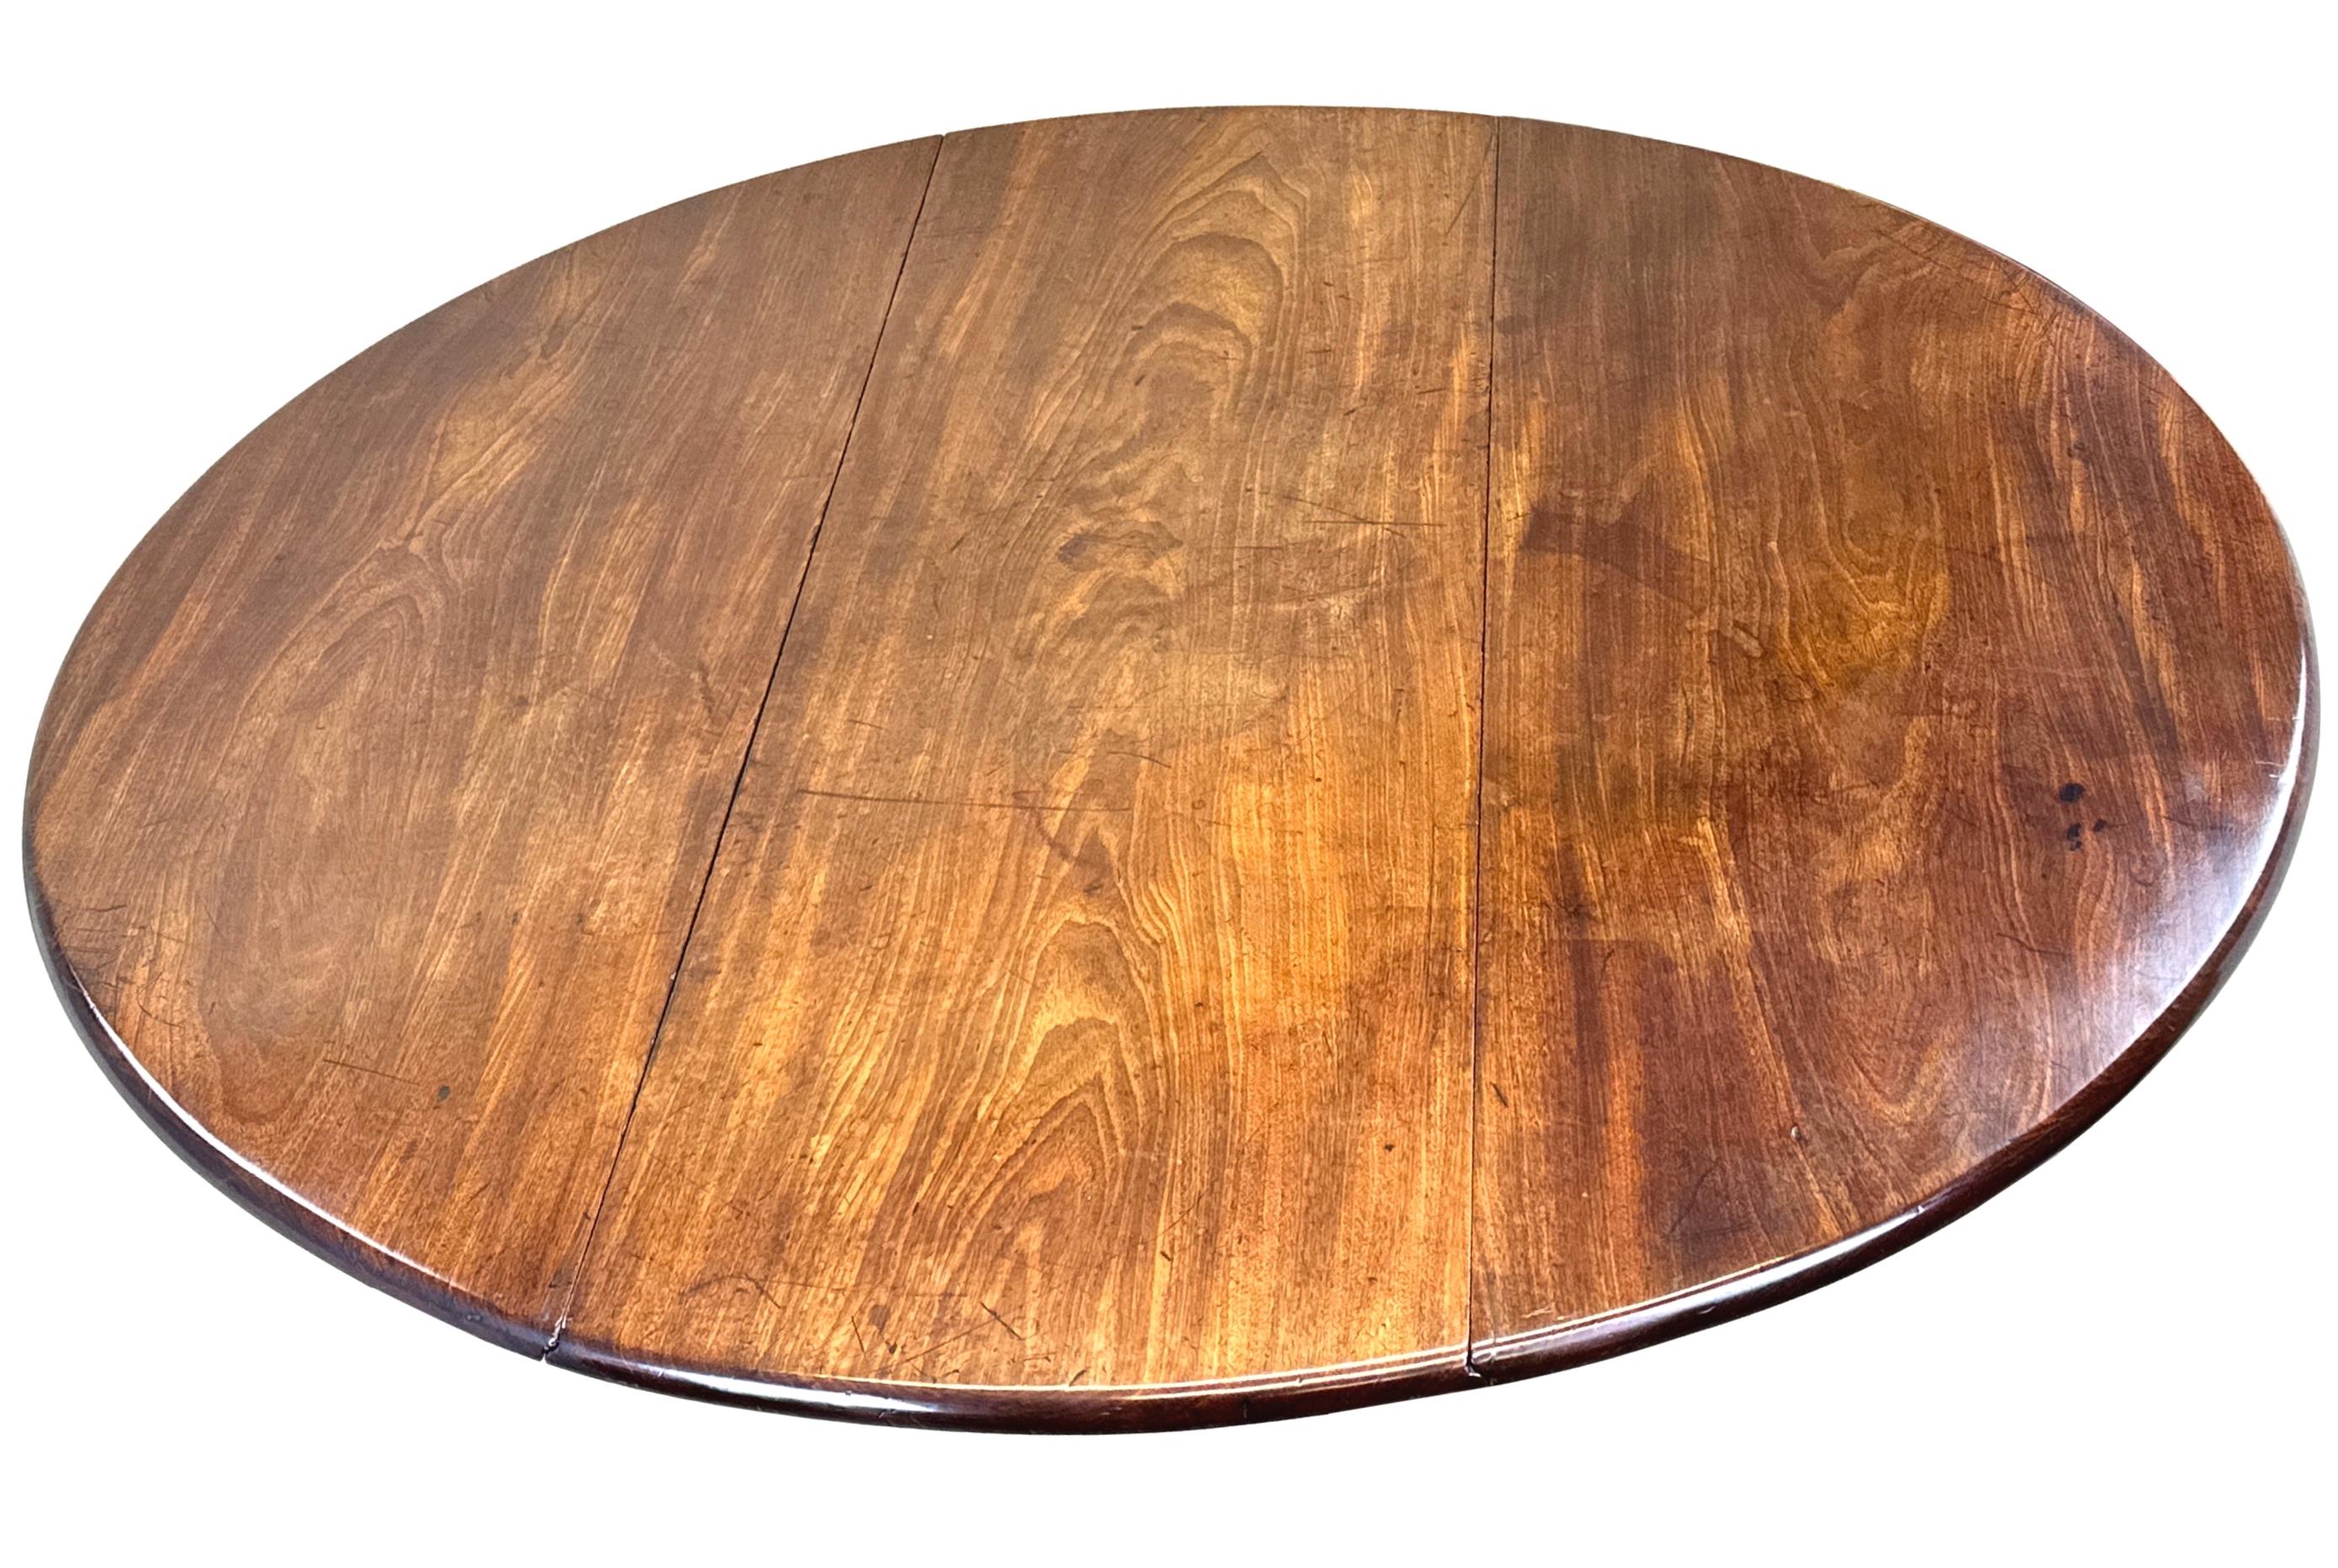 An Extremely Good Quality, Mid-18th Century, George II Period Solid Mahogany Oval Drop Leaf Dining Table, To Seat 8 People, Having Extremely Well Figured Two Flap Top Retaining Exceptional, Rich, Untouched Colour And Patina, Raised On Four Elegant